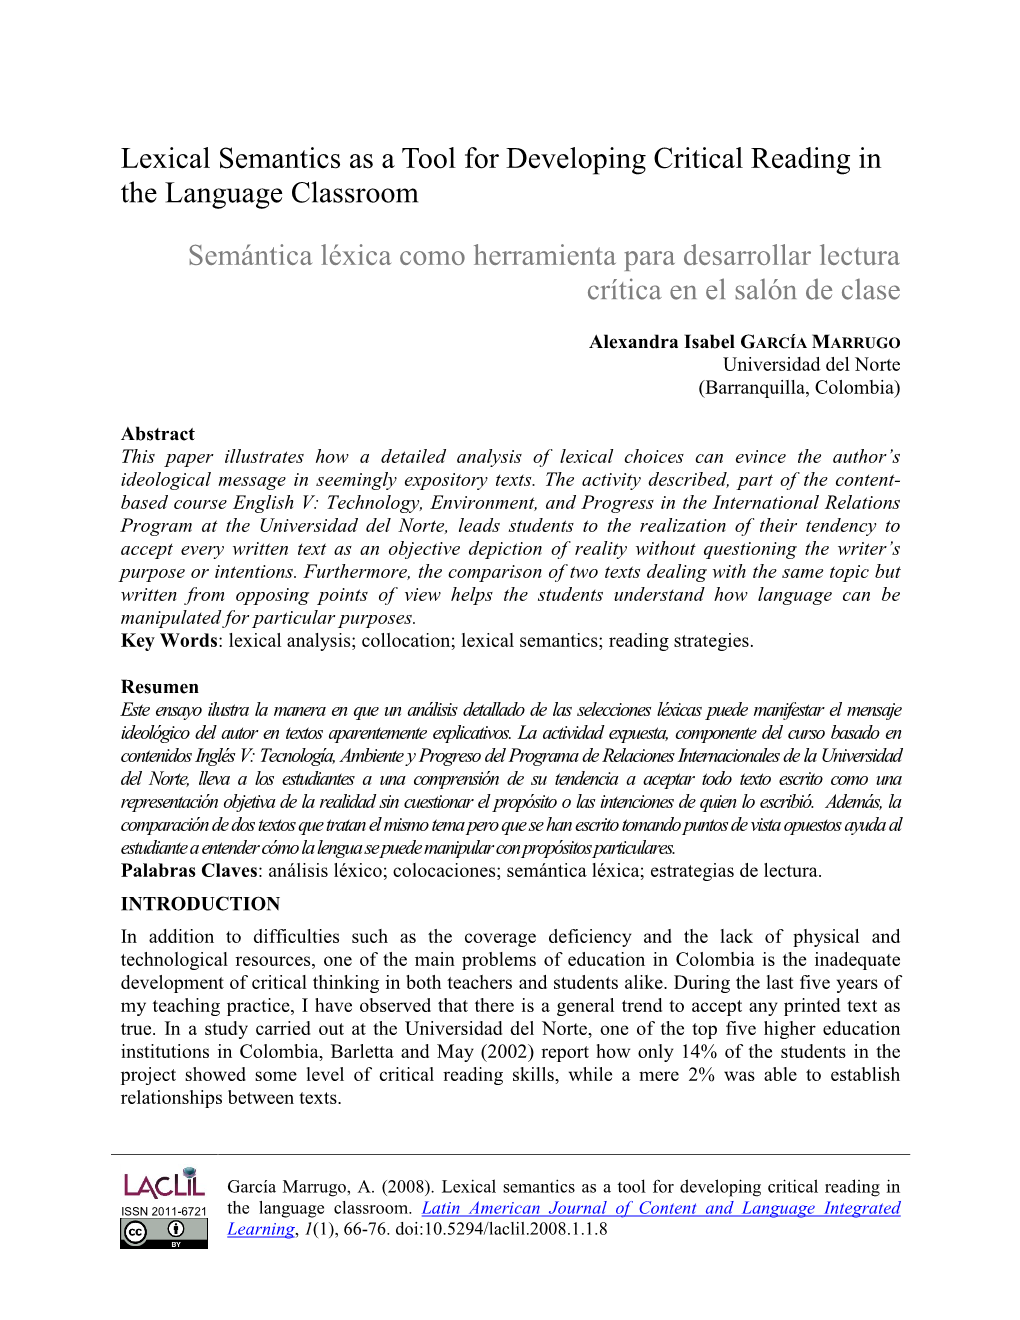 Lexical Semantics As a Tool for Developing Critical Reading in the Language Classroom